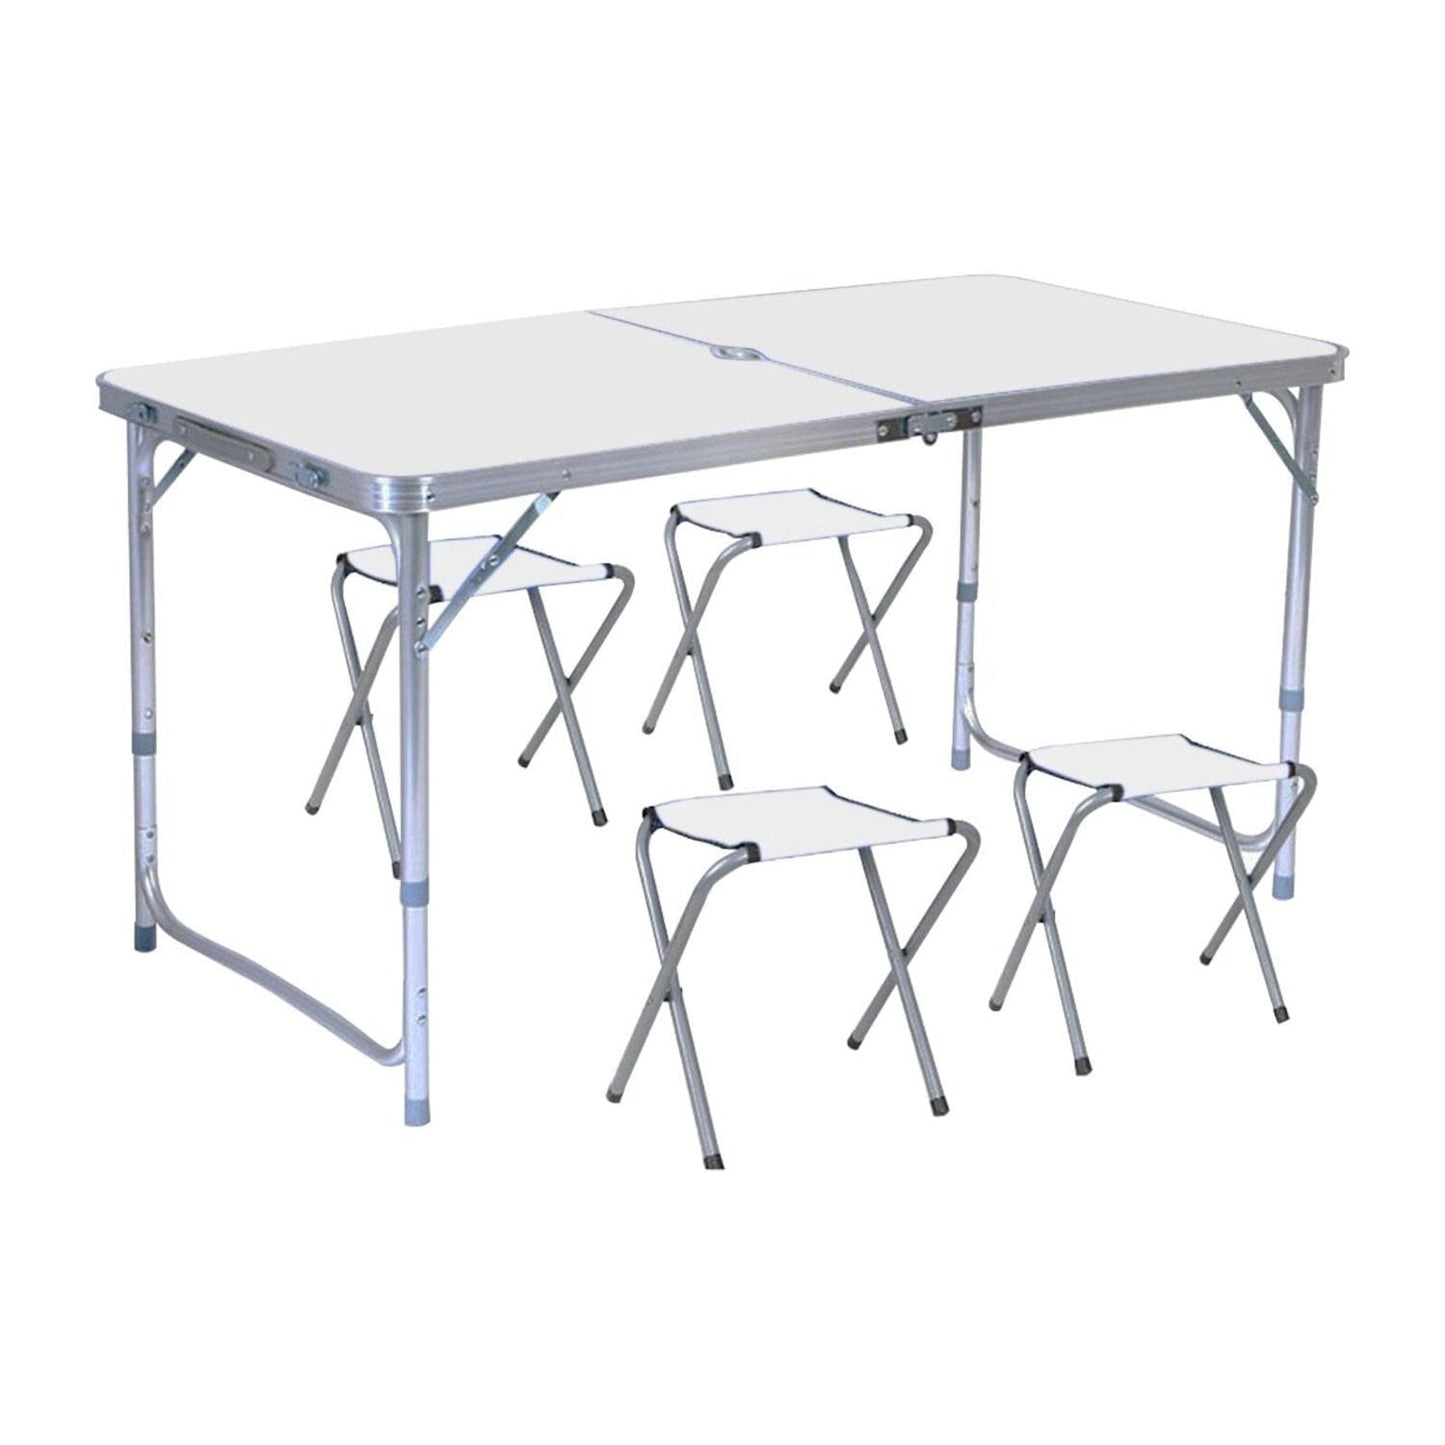 Kiliroo Lightweight and Portable Aluminium Frame Camping Table 120cm Silver with 4 Chair